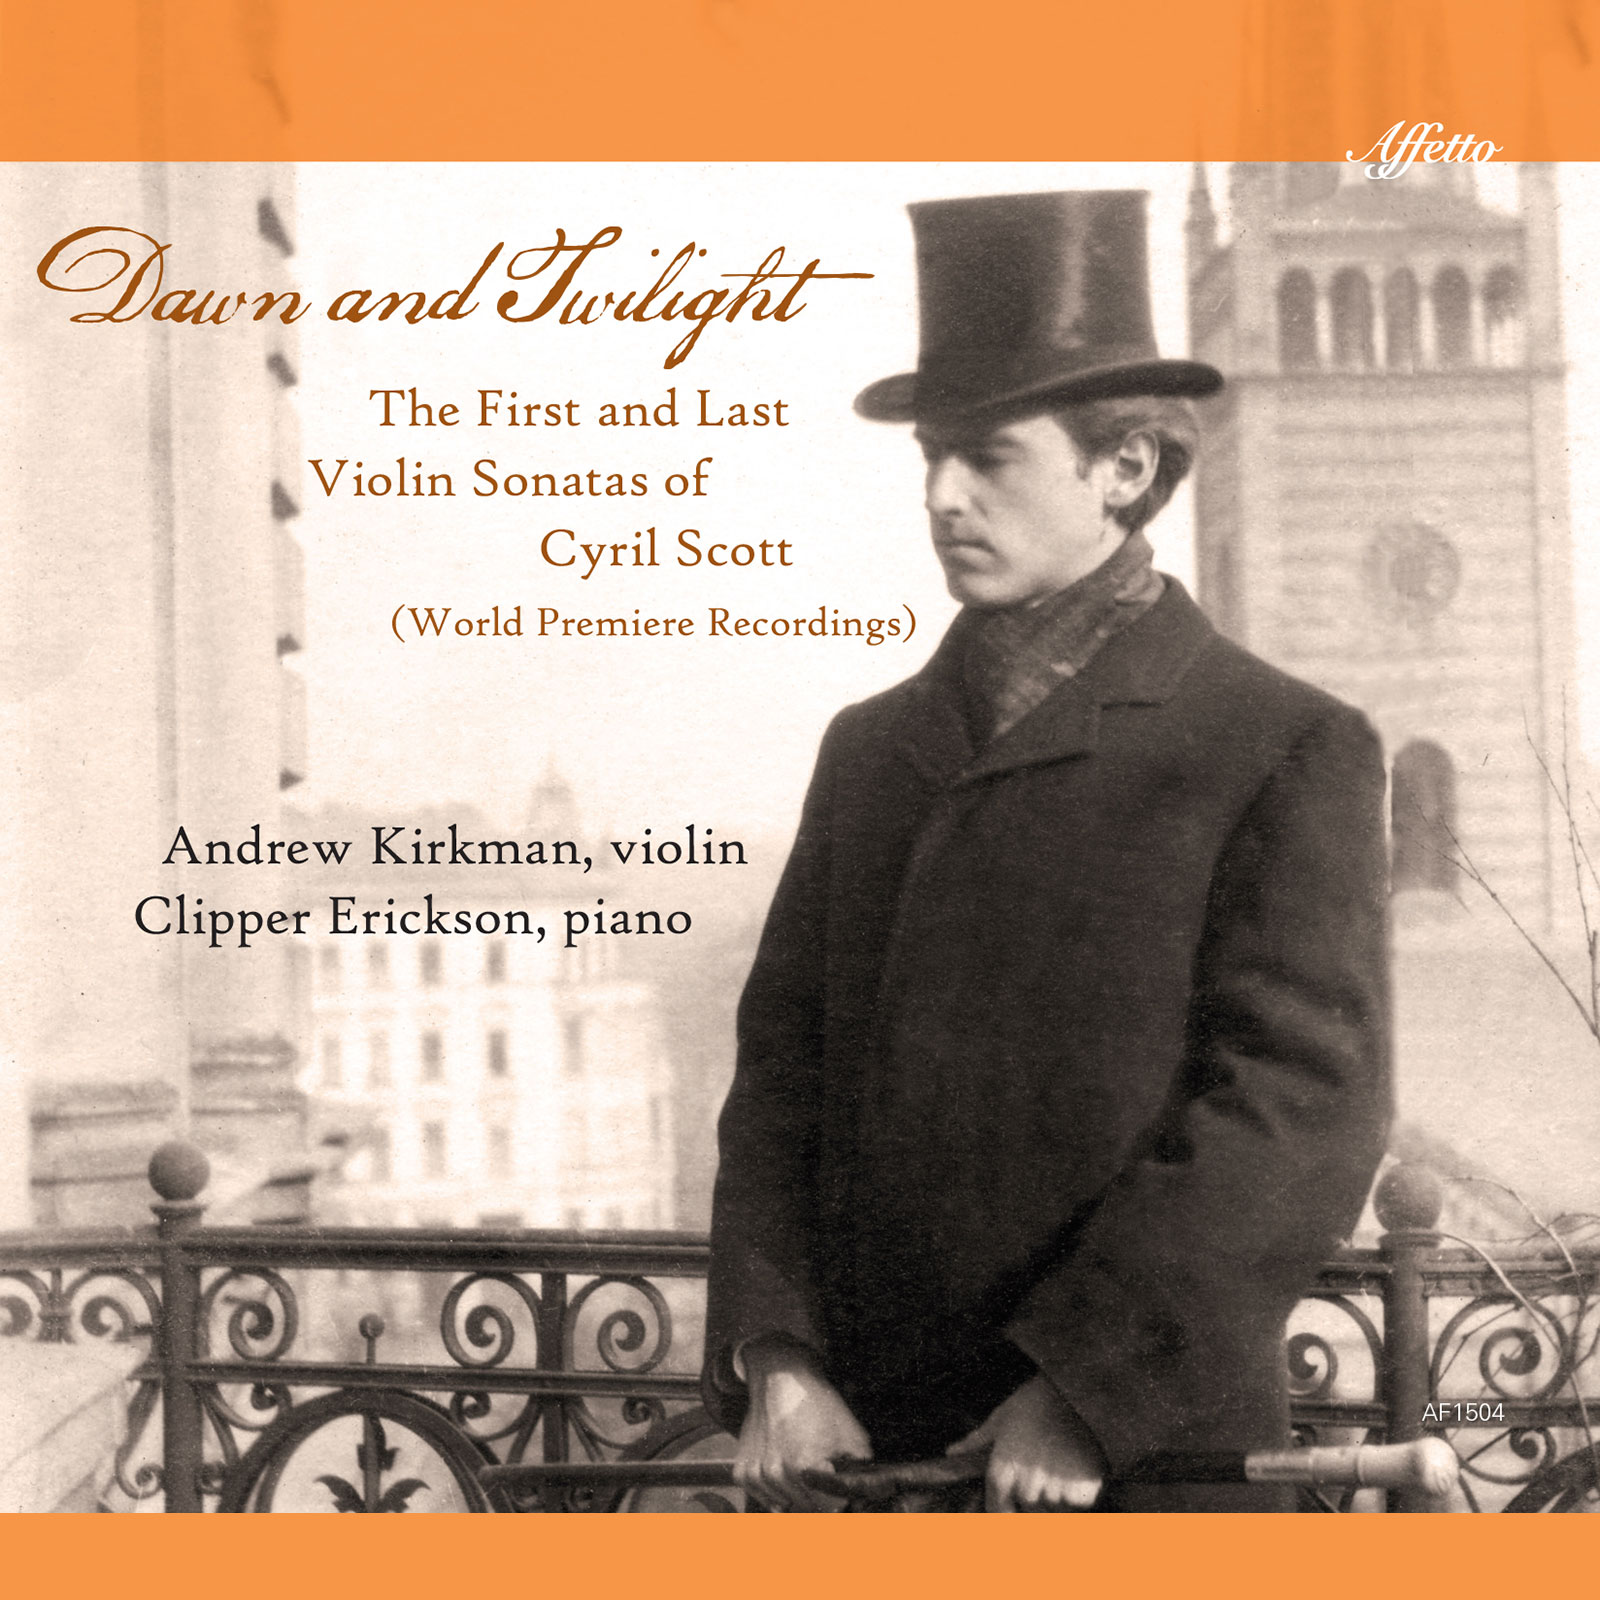 Dawn and Twilight: The First and Last Violin Sonatas of Cyril Scott (World Premiere Recordings)